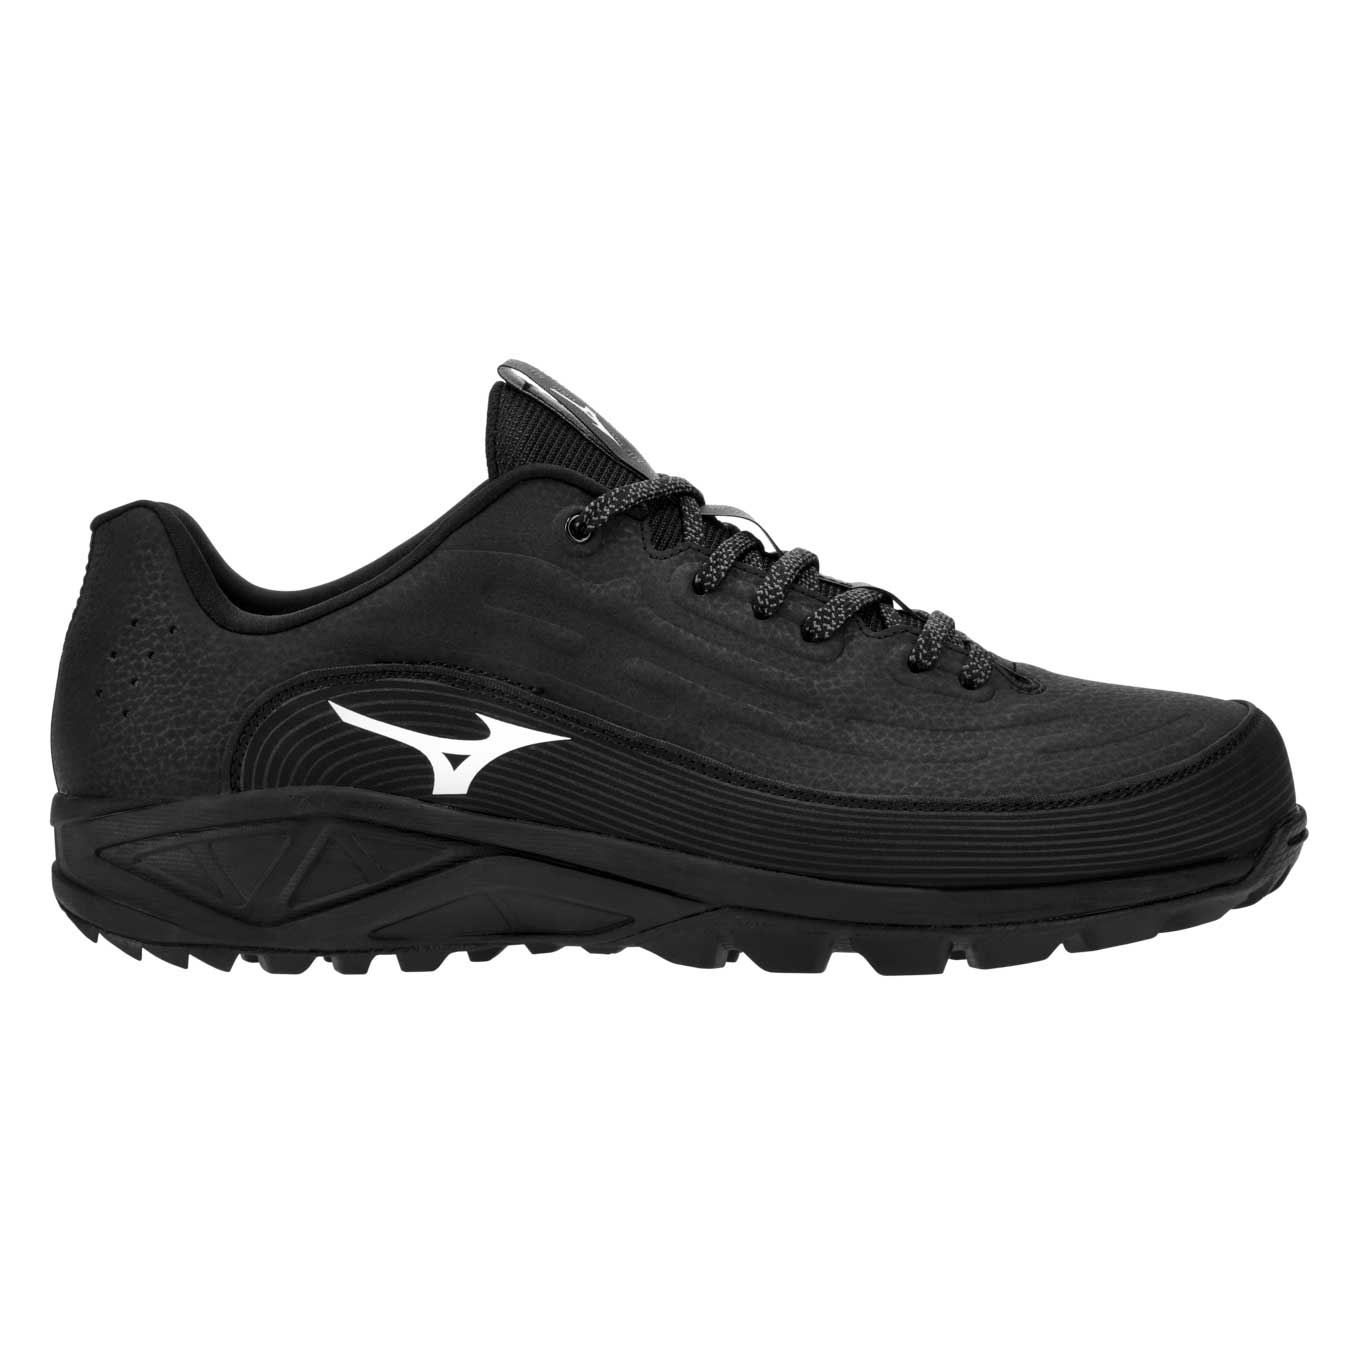 Mizuno Ambition 3 All-Surface Low Turfs